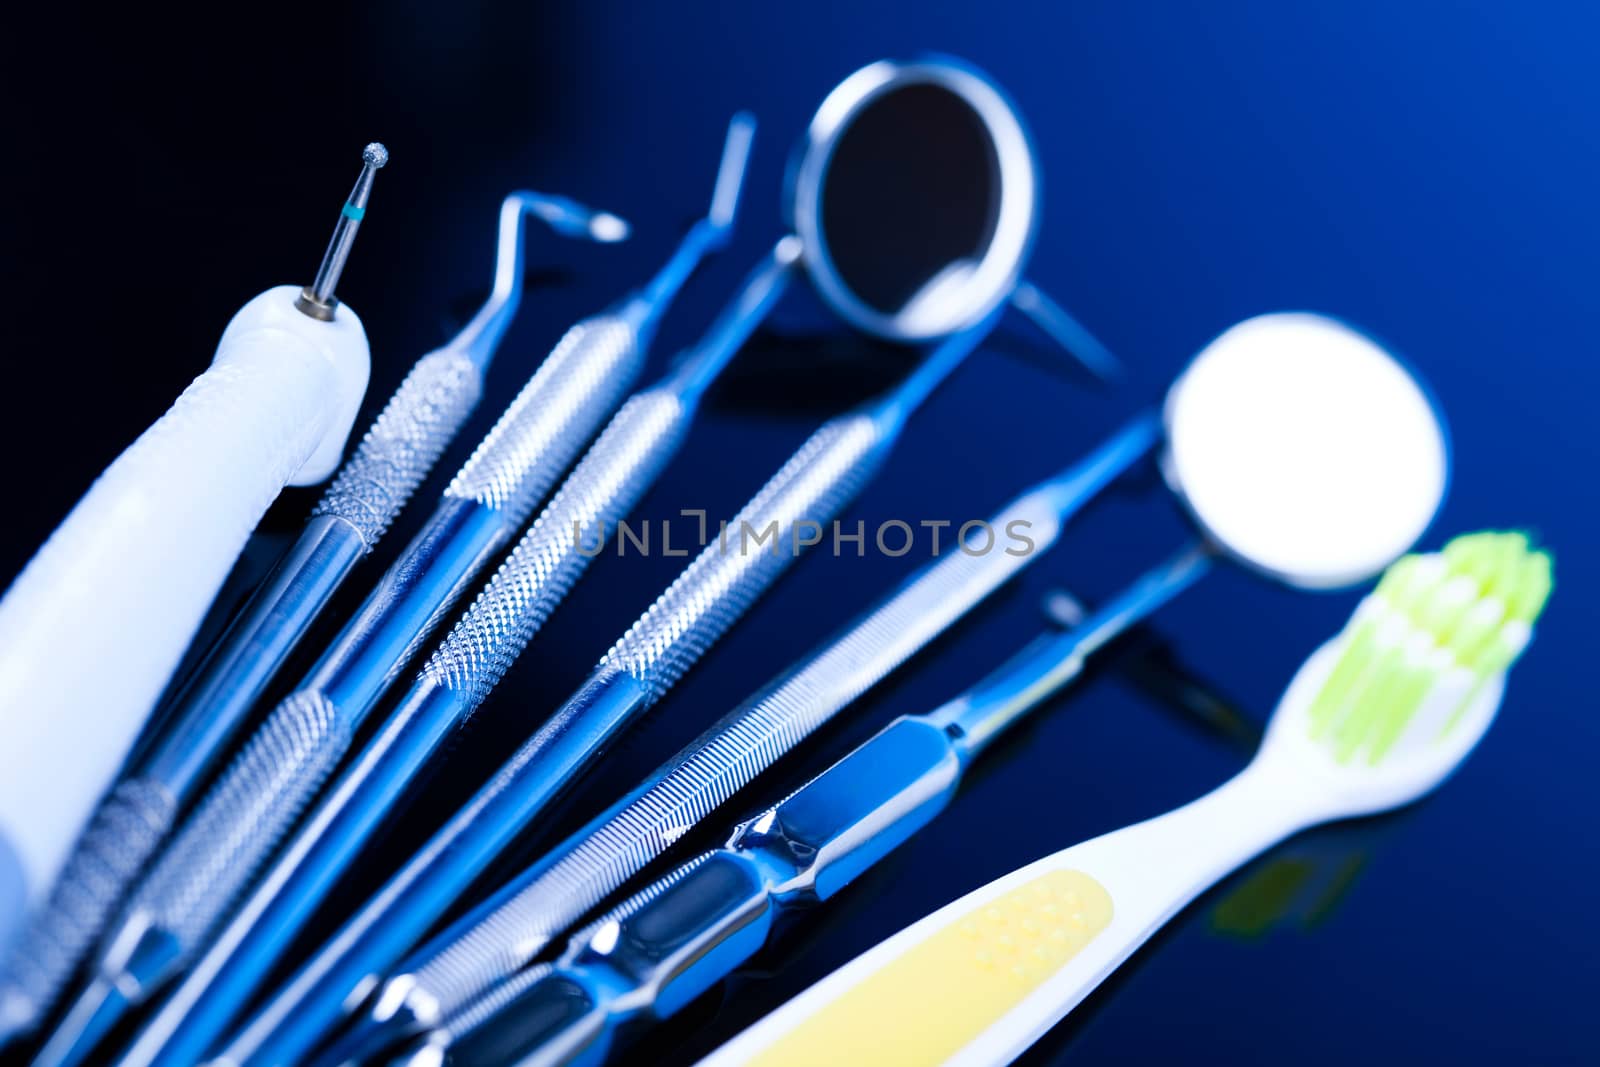 Stomatology equipment, bright colorful tone concept